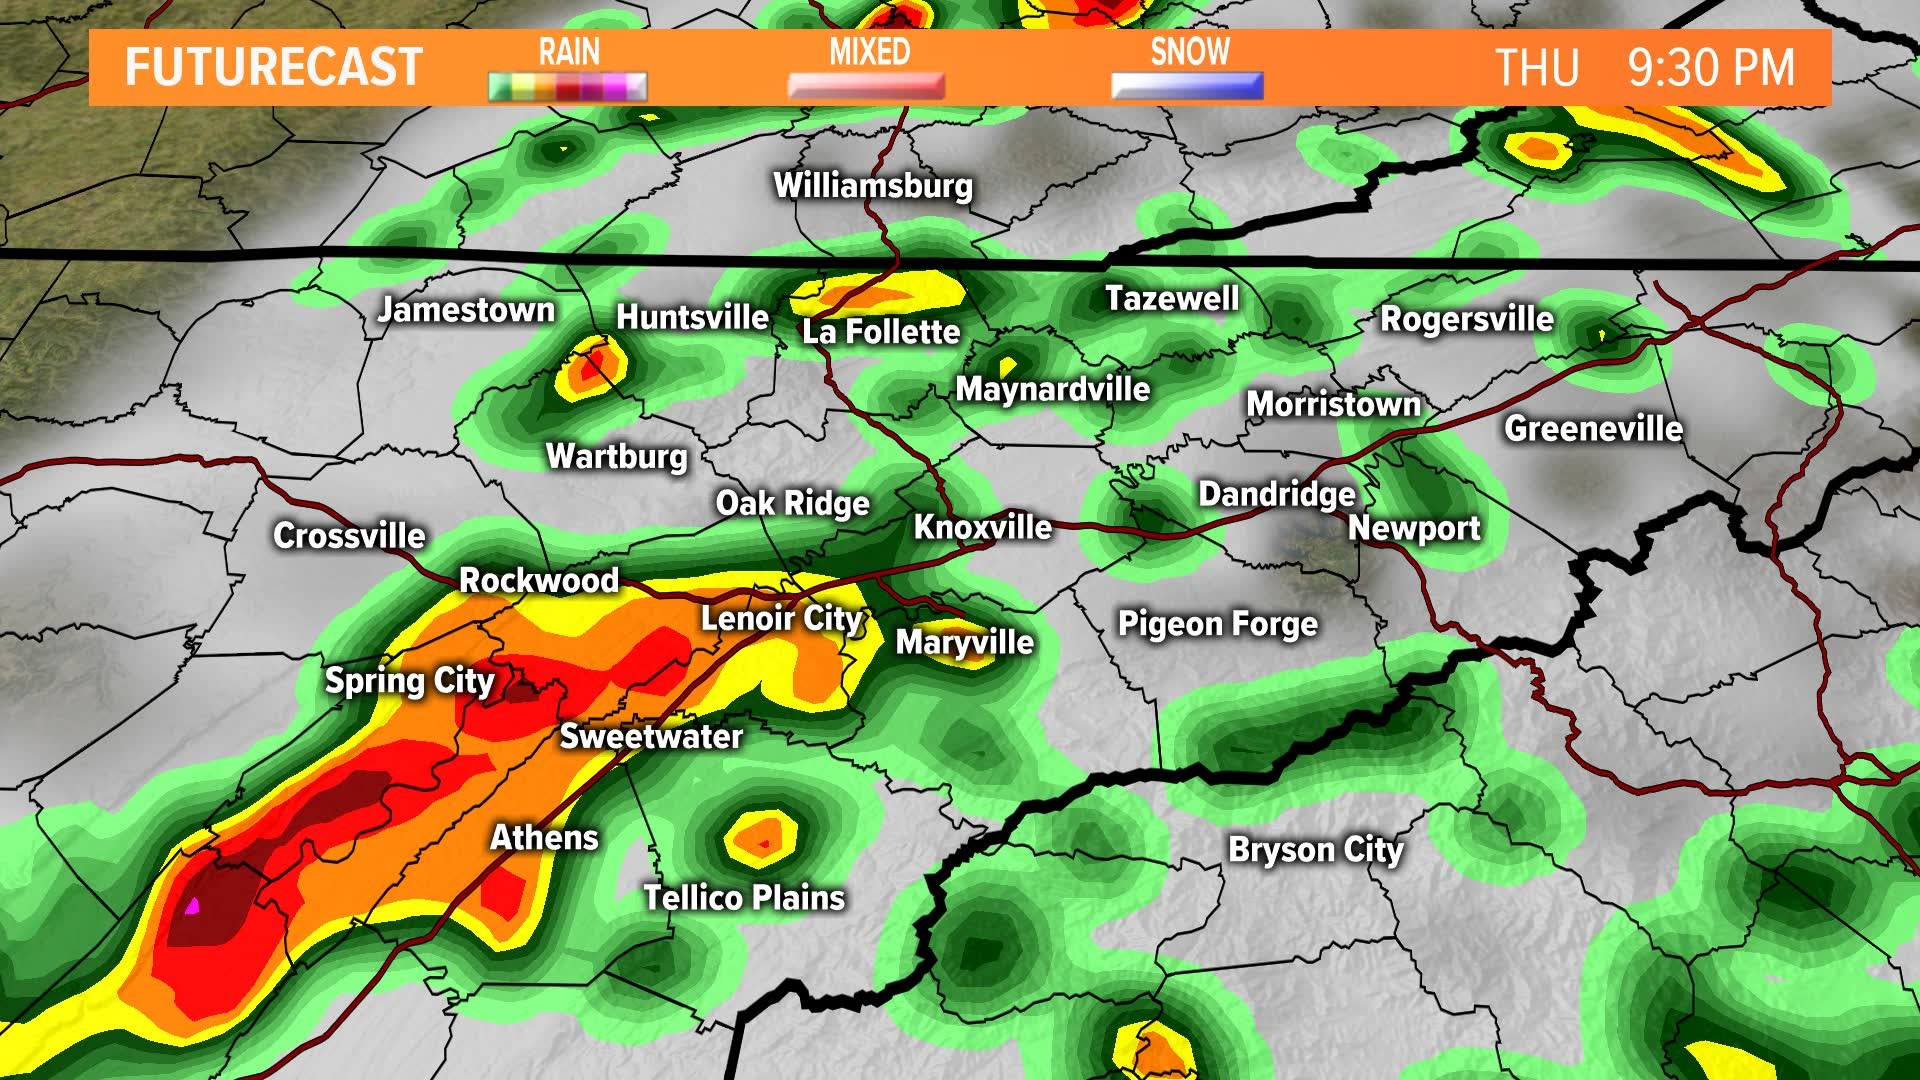 This is a look at the latest on the storm as it approaches and pushes through East Tennessee